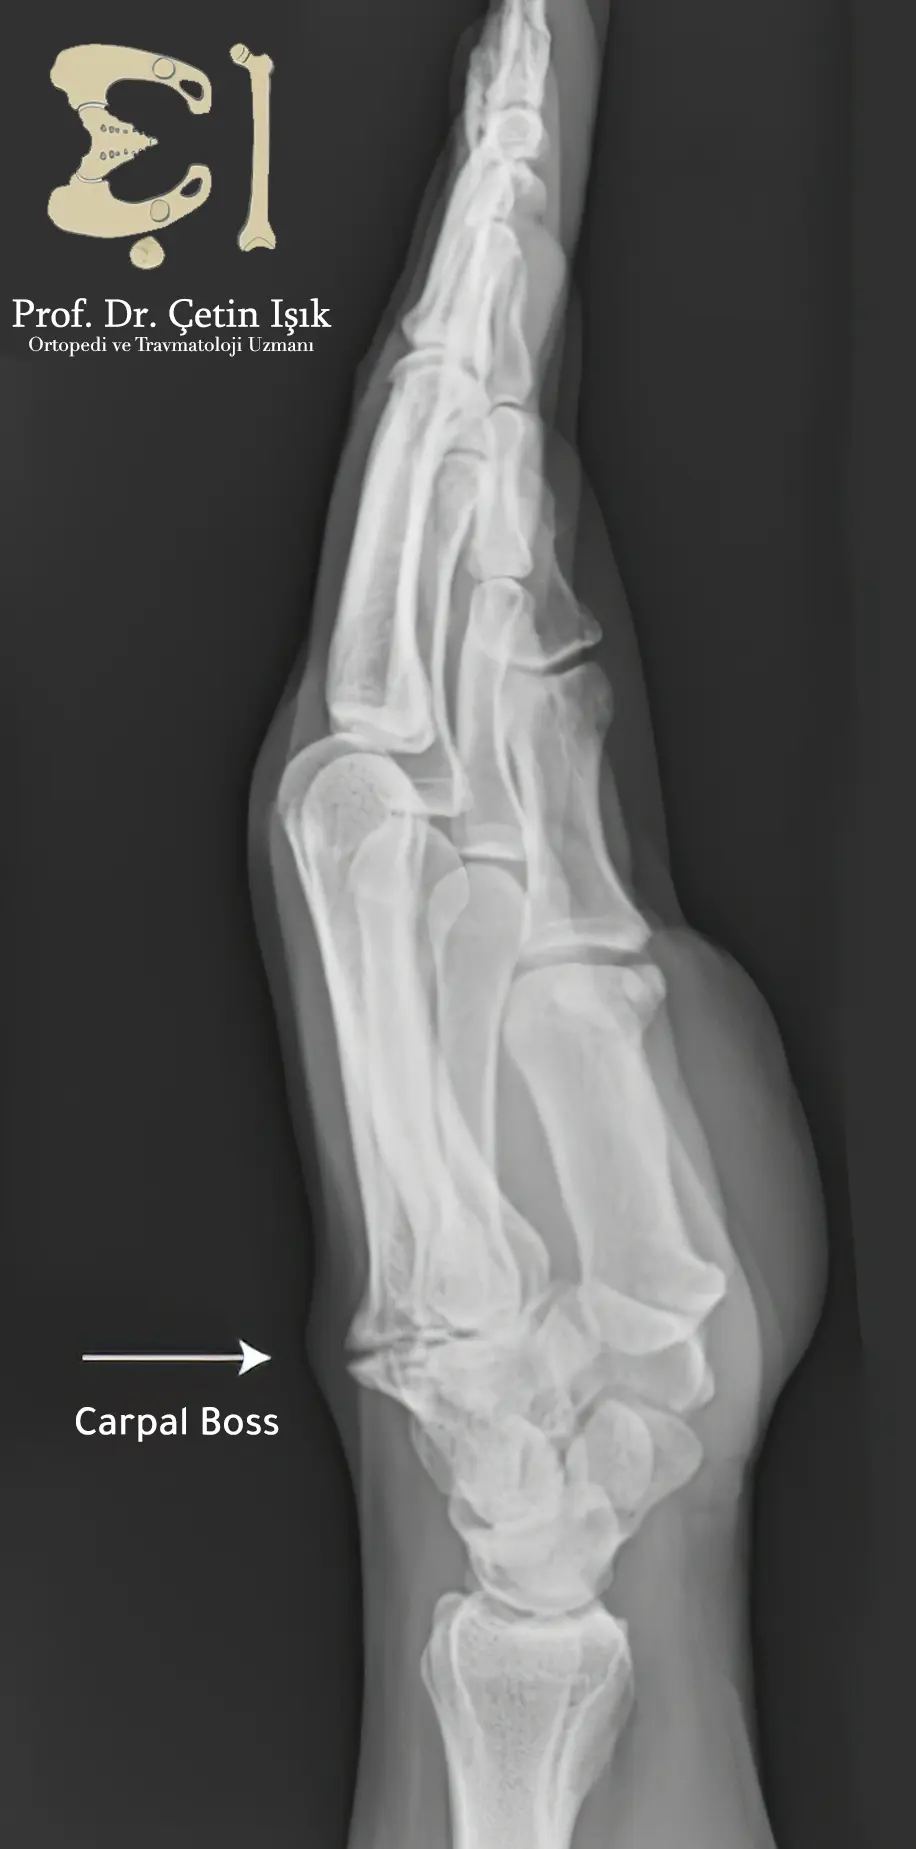 An image showing carpal boss by radiography, through X-Ray